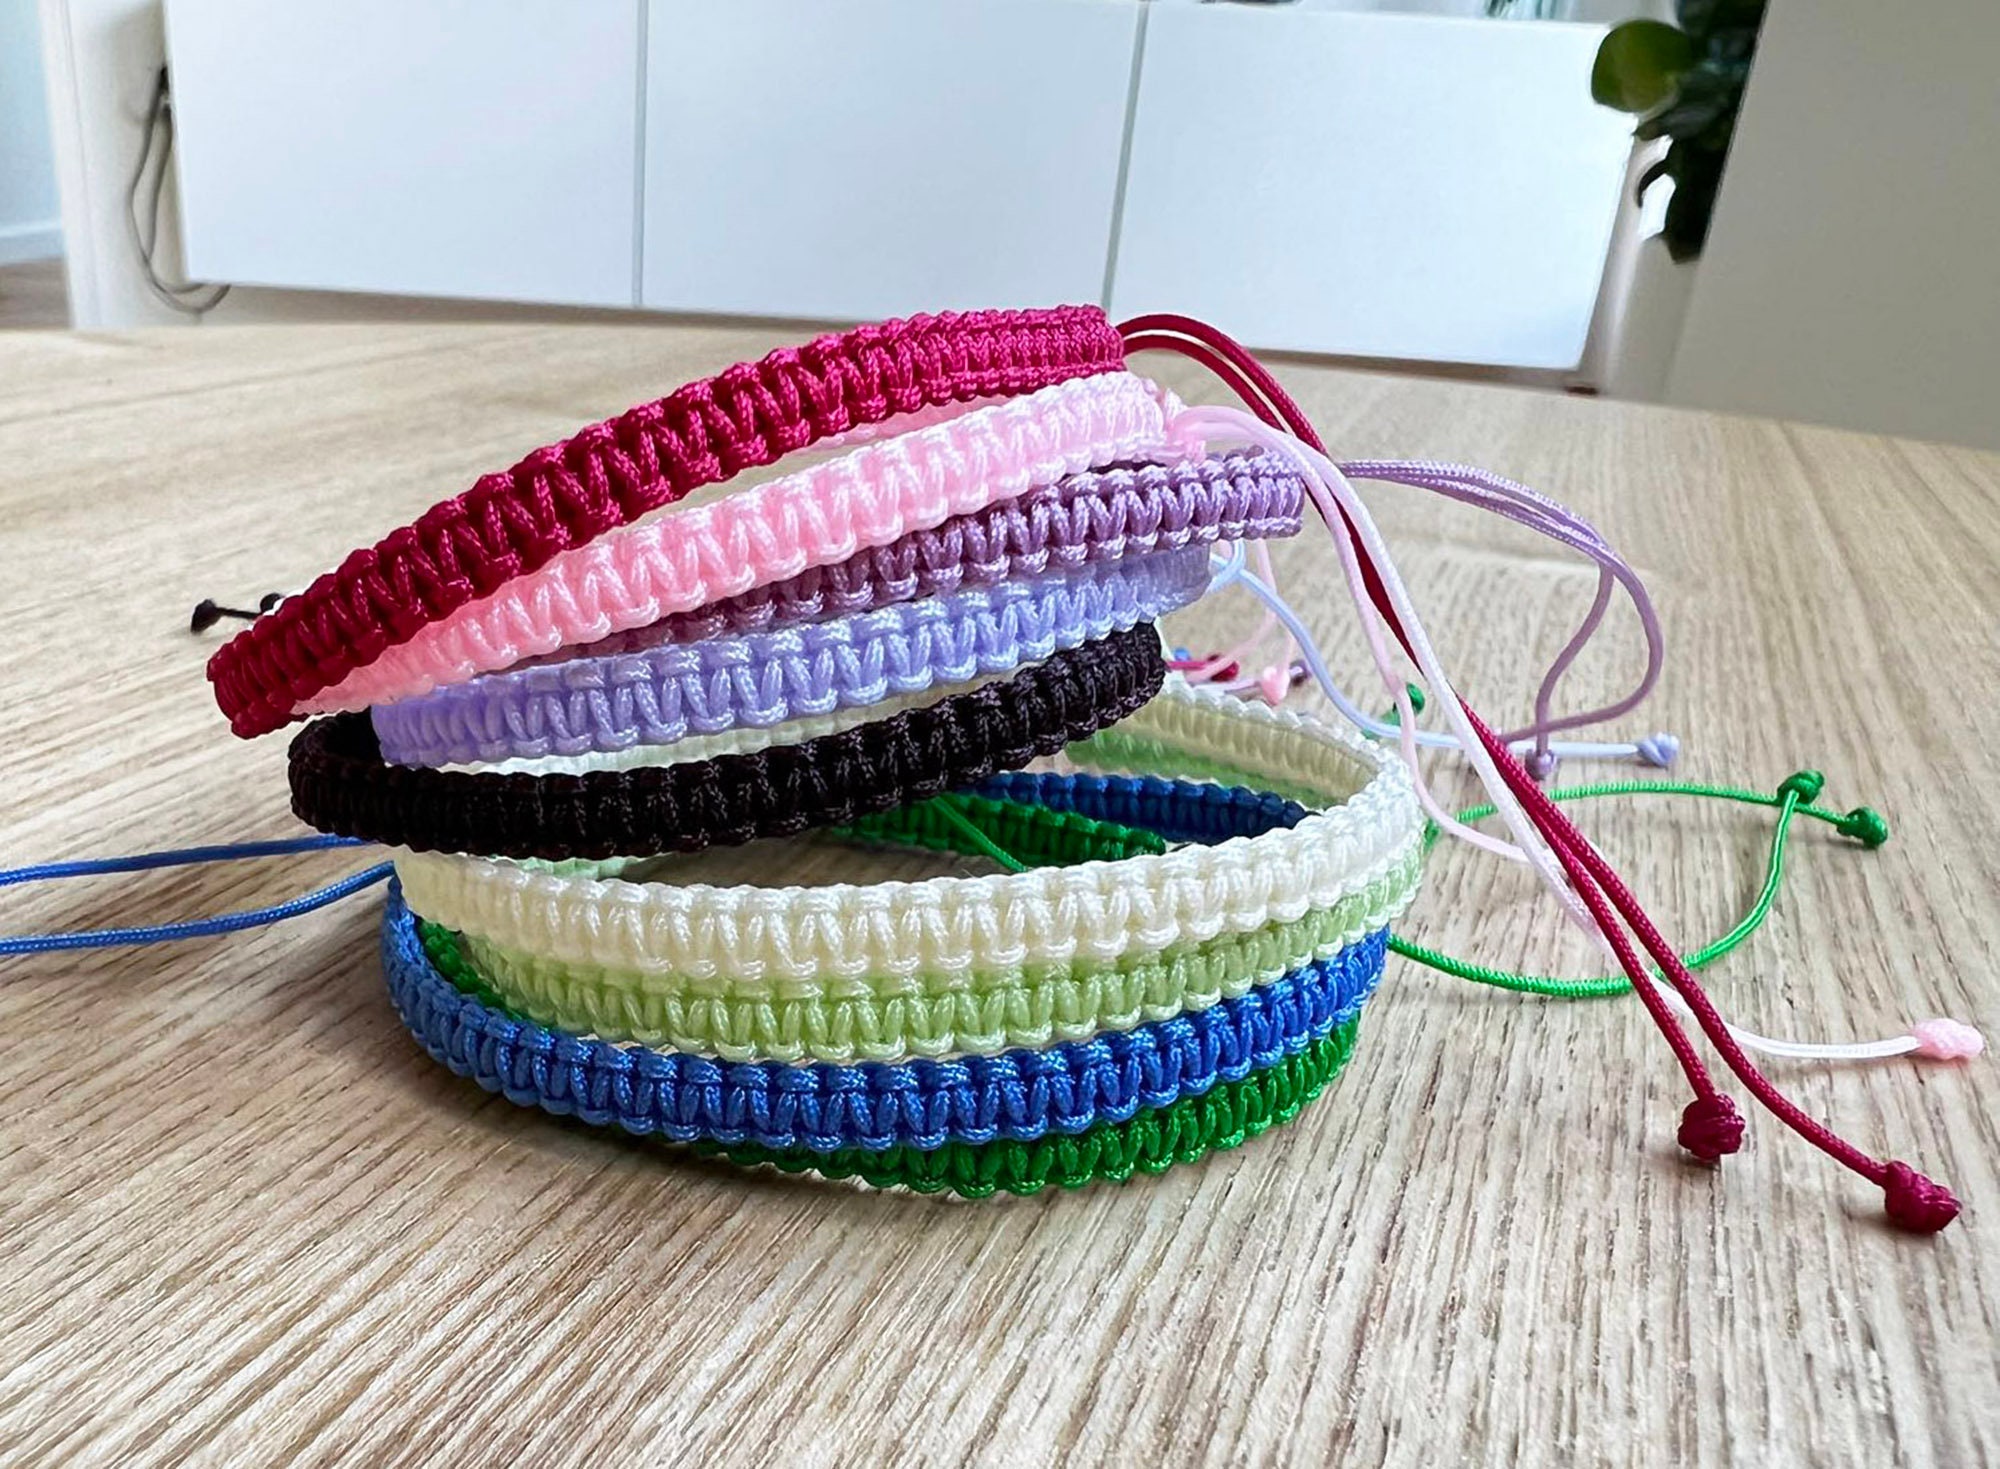 One Day Weaving South American Style Colored Rope Ornaments Macrame Book  DIY Bracelet Ring Knitting Tutorial Book - AliExpress